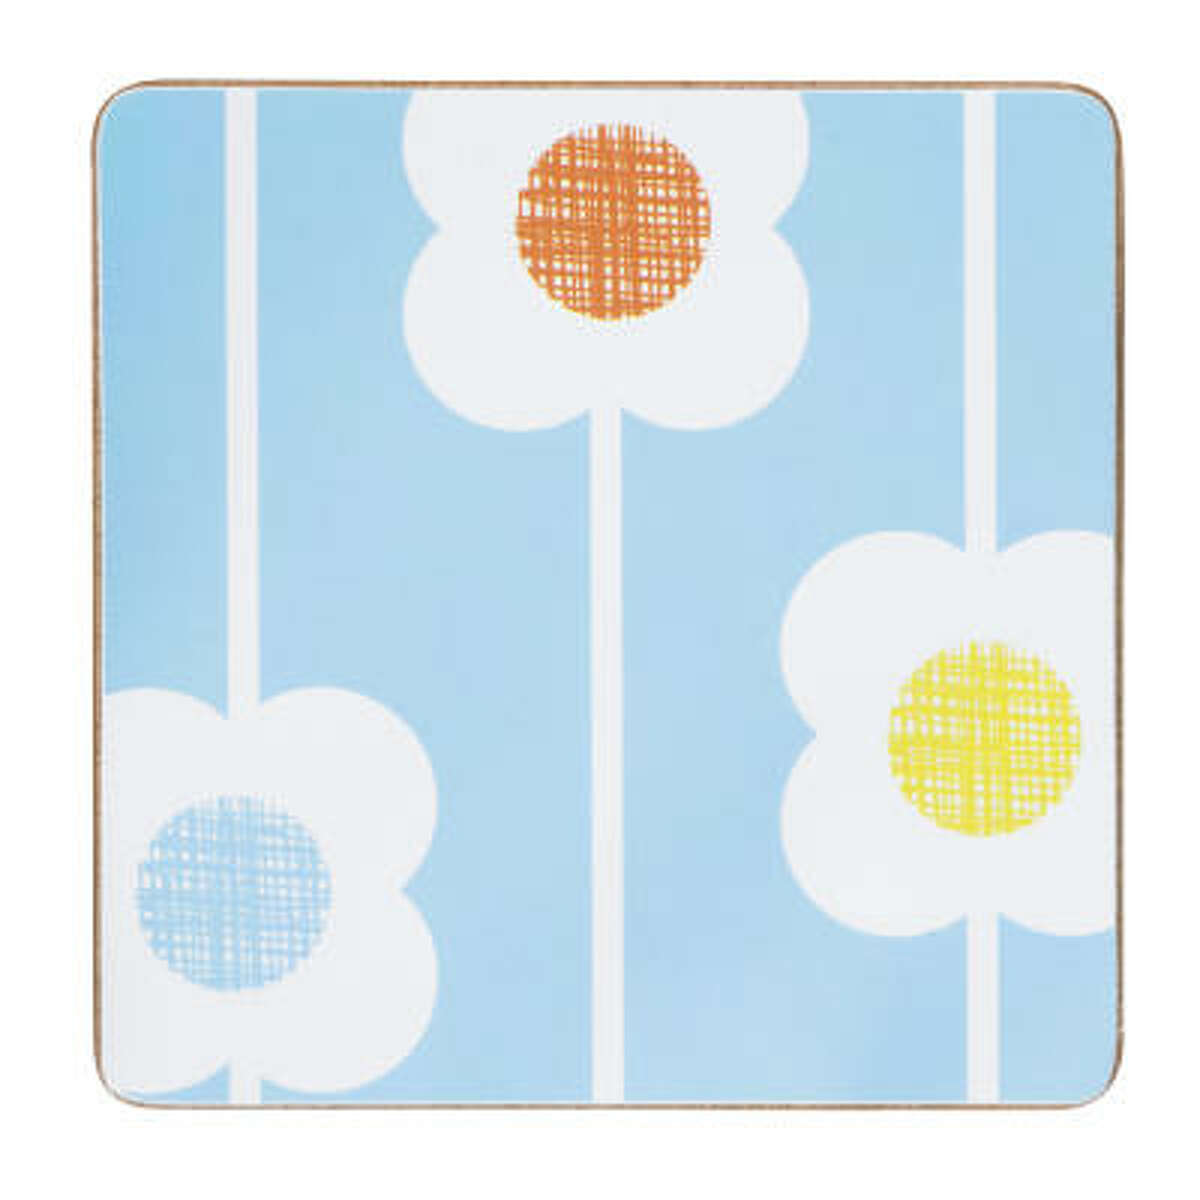 From Orla Kiely's new home collection for Target.